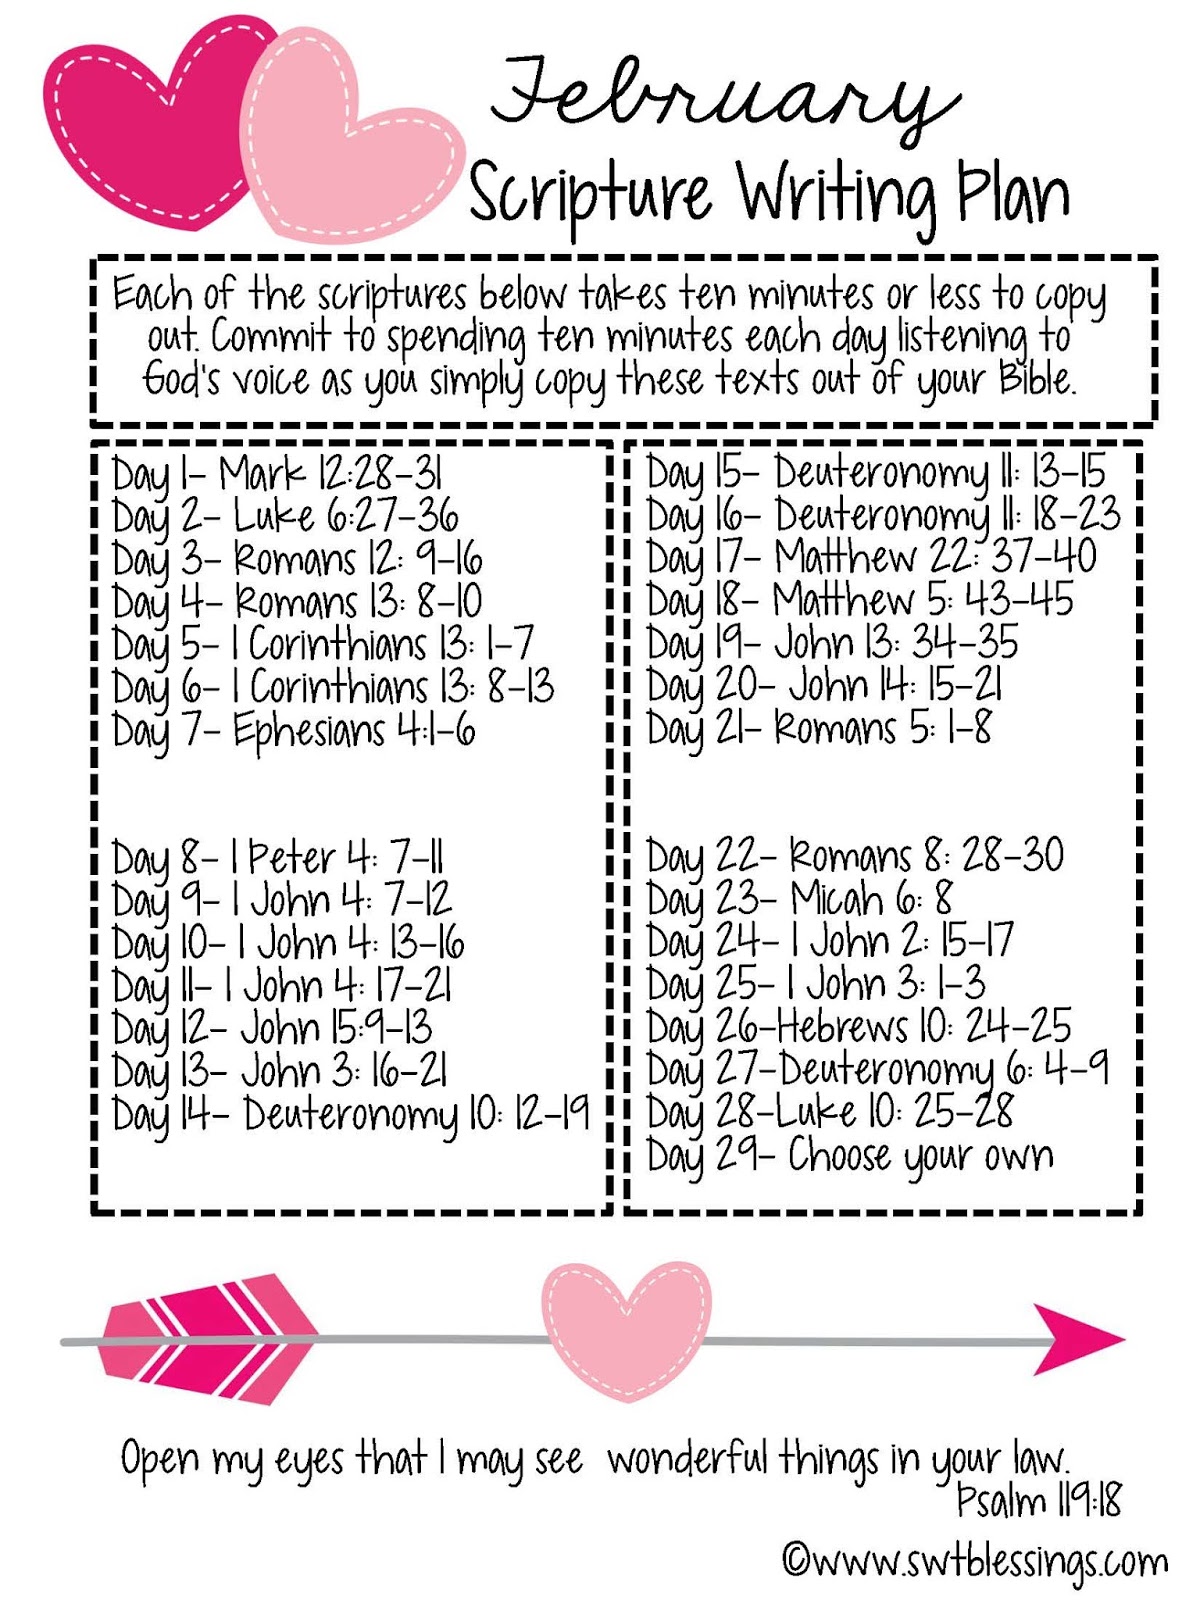 February Bible Reading Plans | Bible Reading Roundup